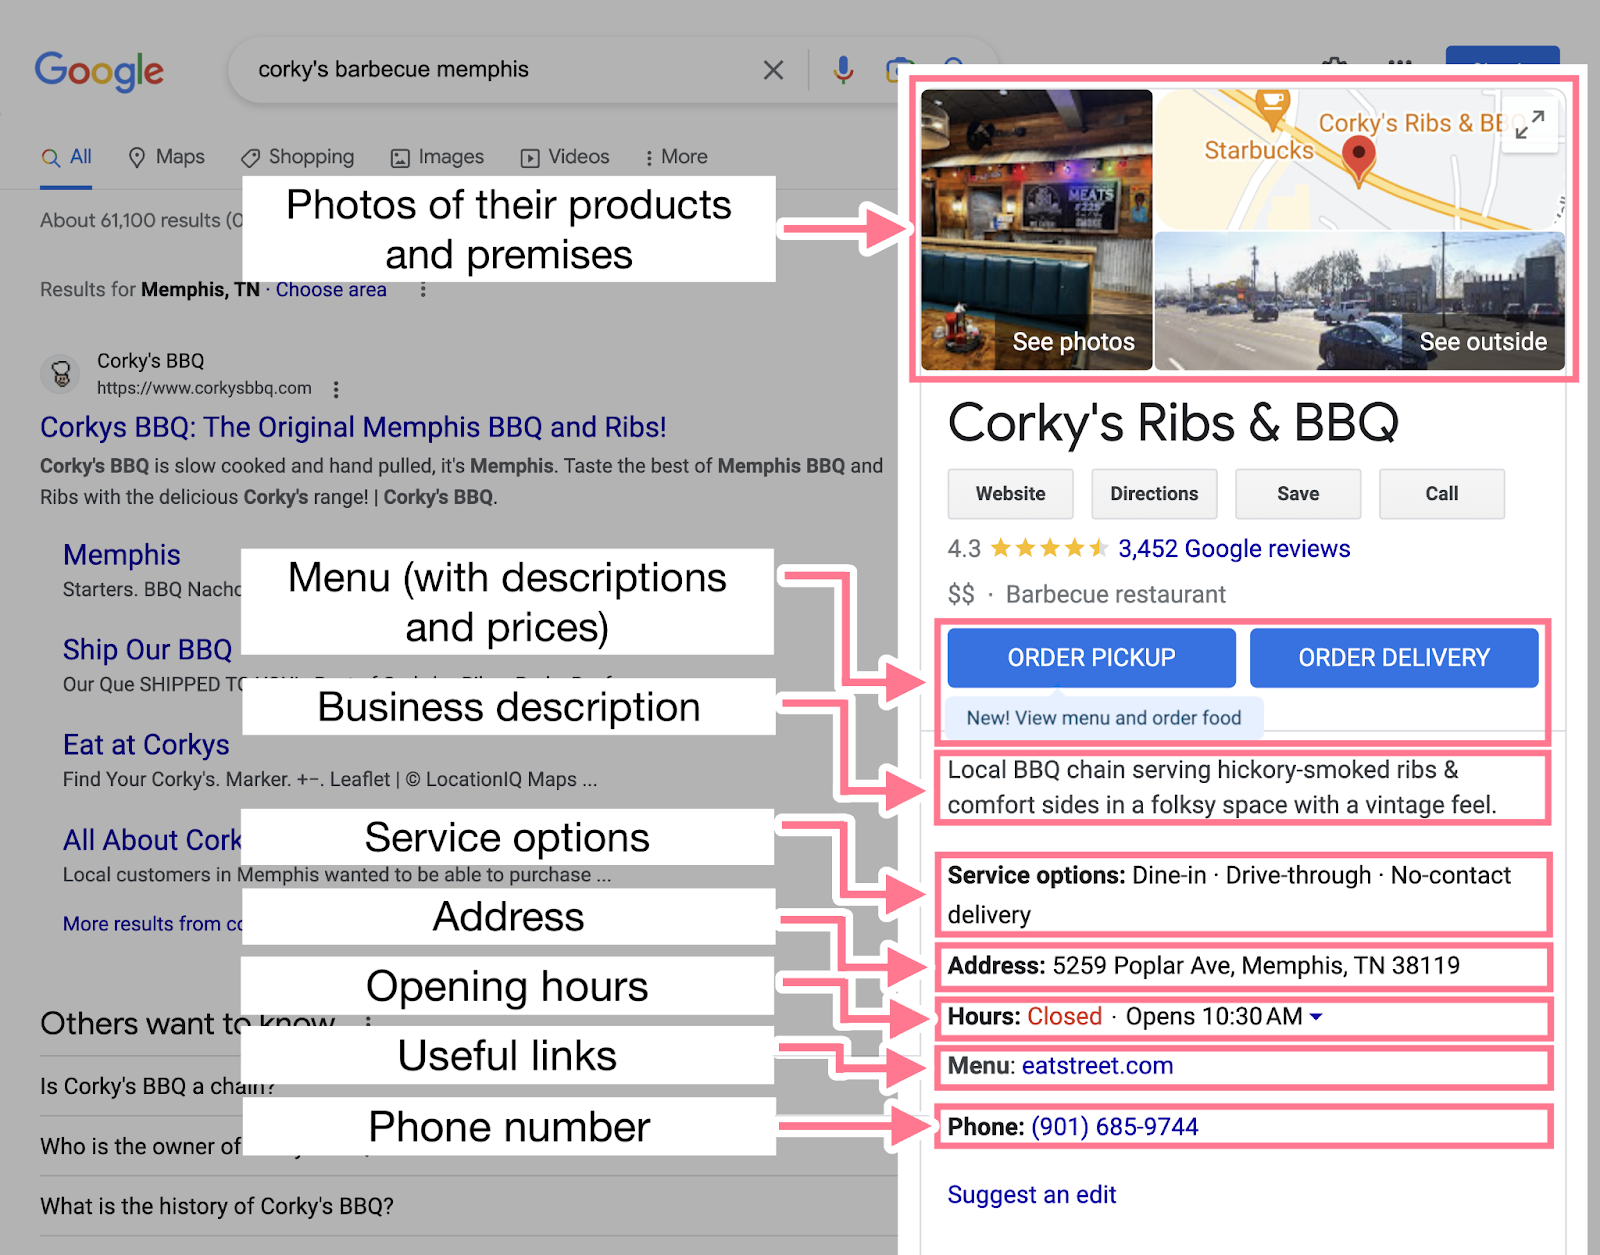 Corky’s Ribs & BBQ information in SERP